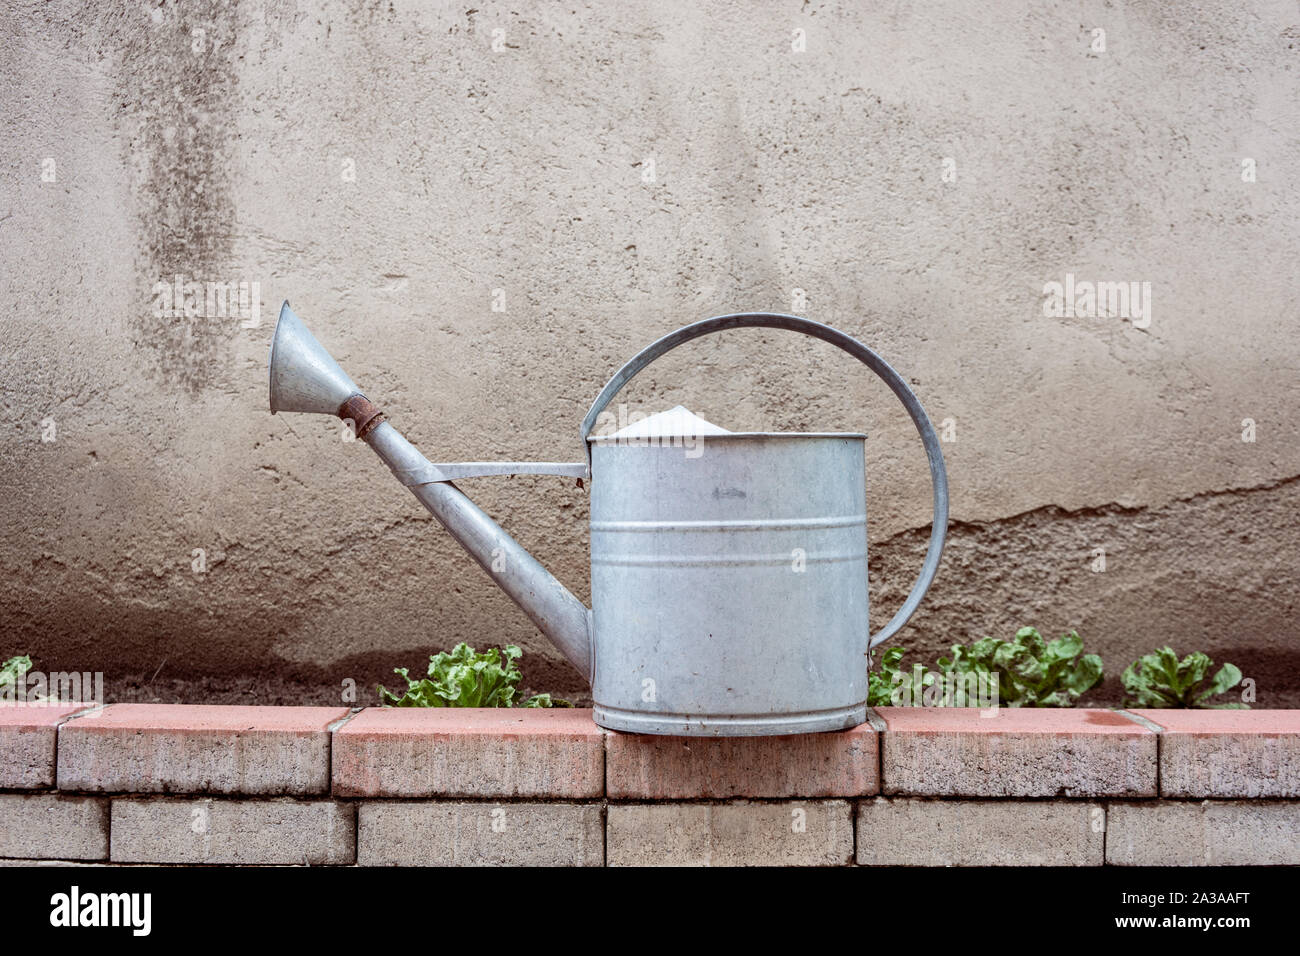 Grey Metal Watering Can in a garden Stock Photo